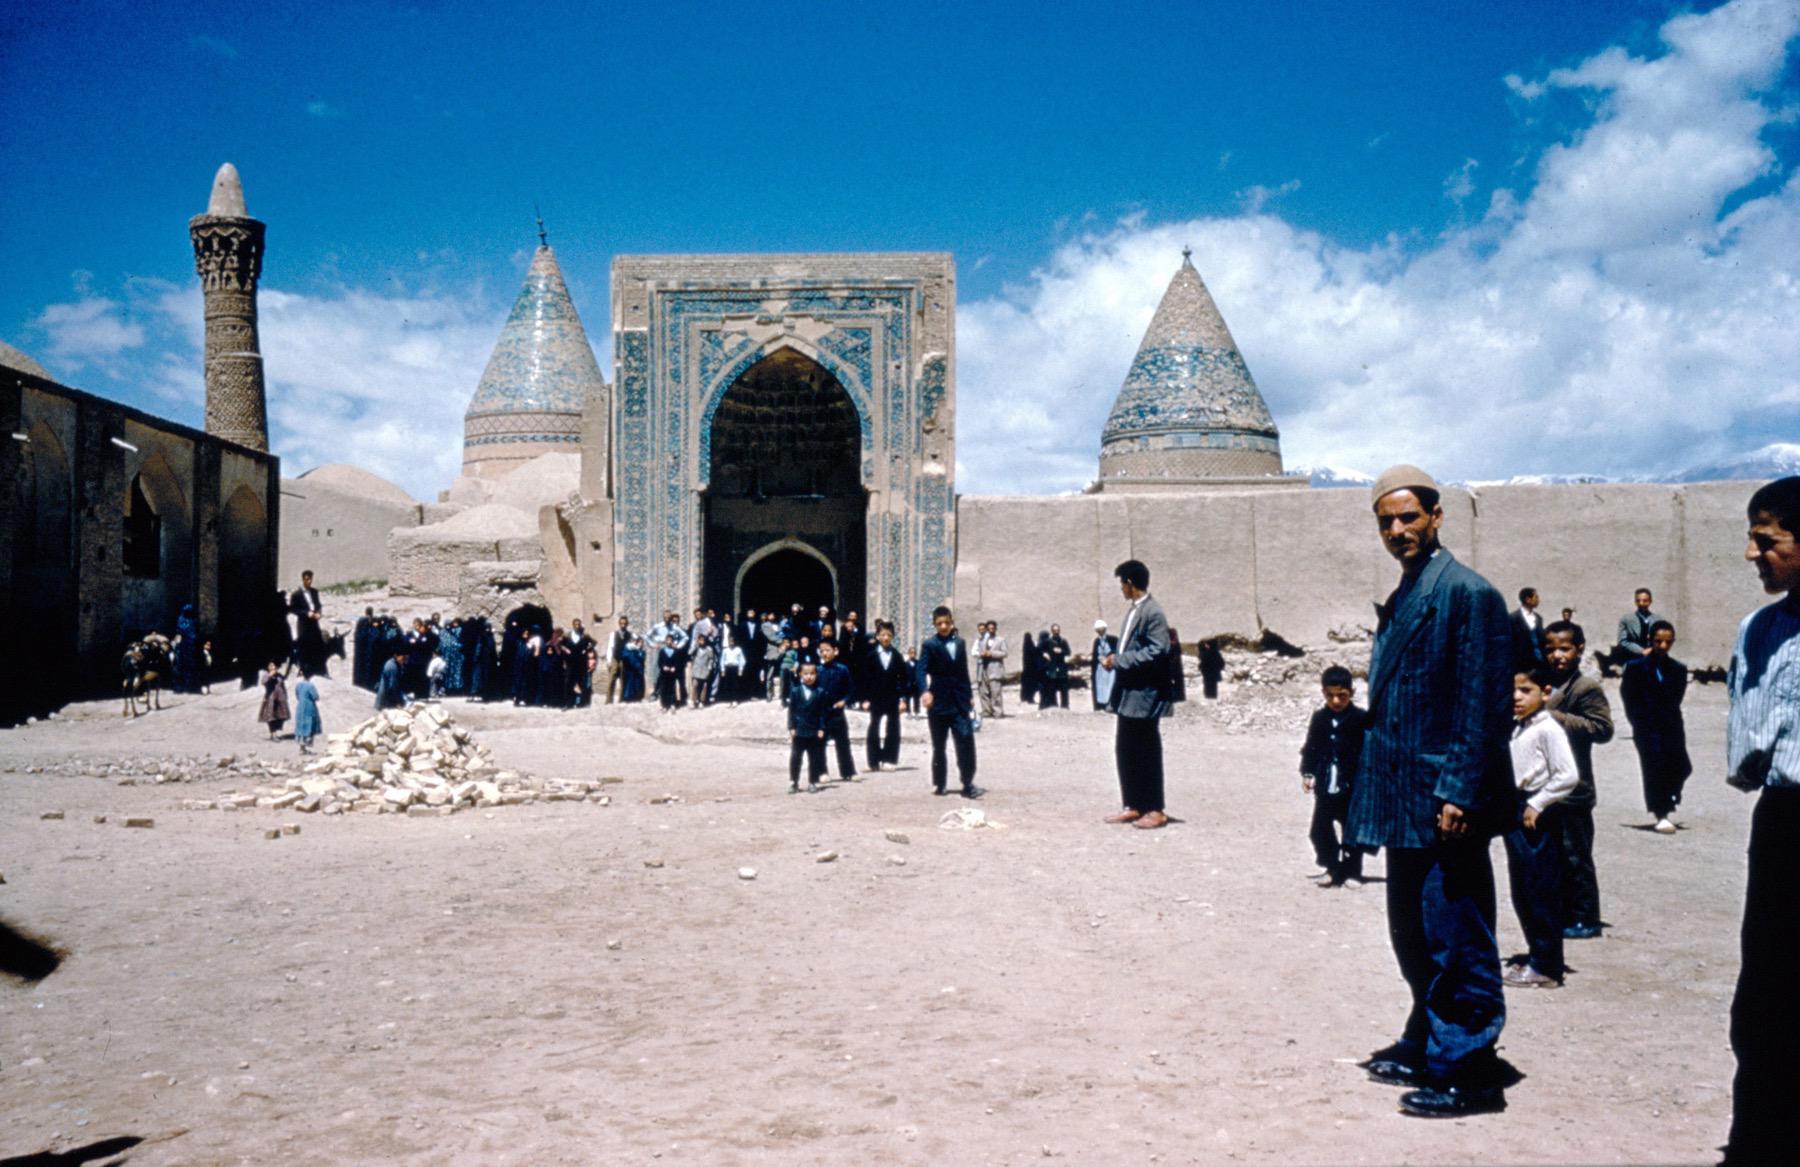 General view from east, showing the entrance iwan at the center, Gonbad-e Ghazan Khan on the right, with the dome of Emamzad-e Mohammad and the minaret of the mosque on the left